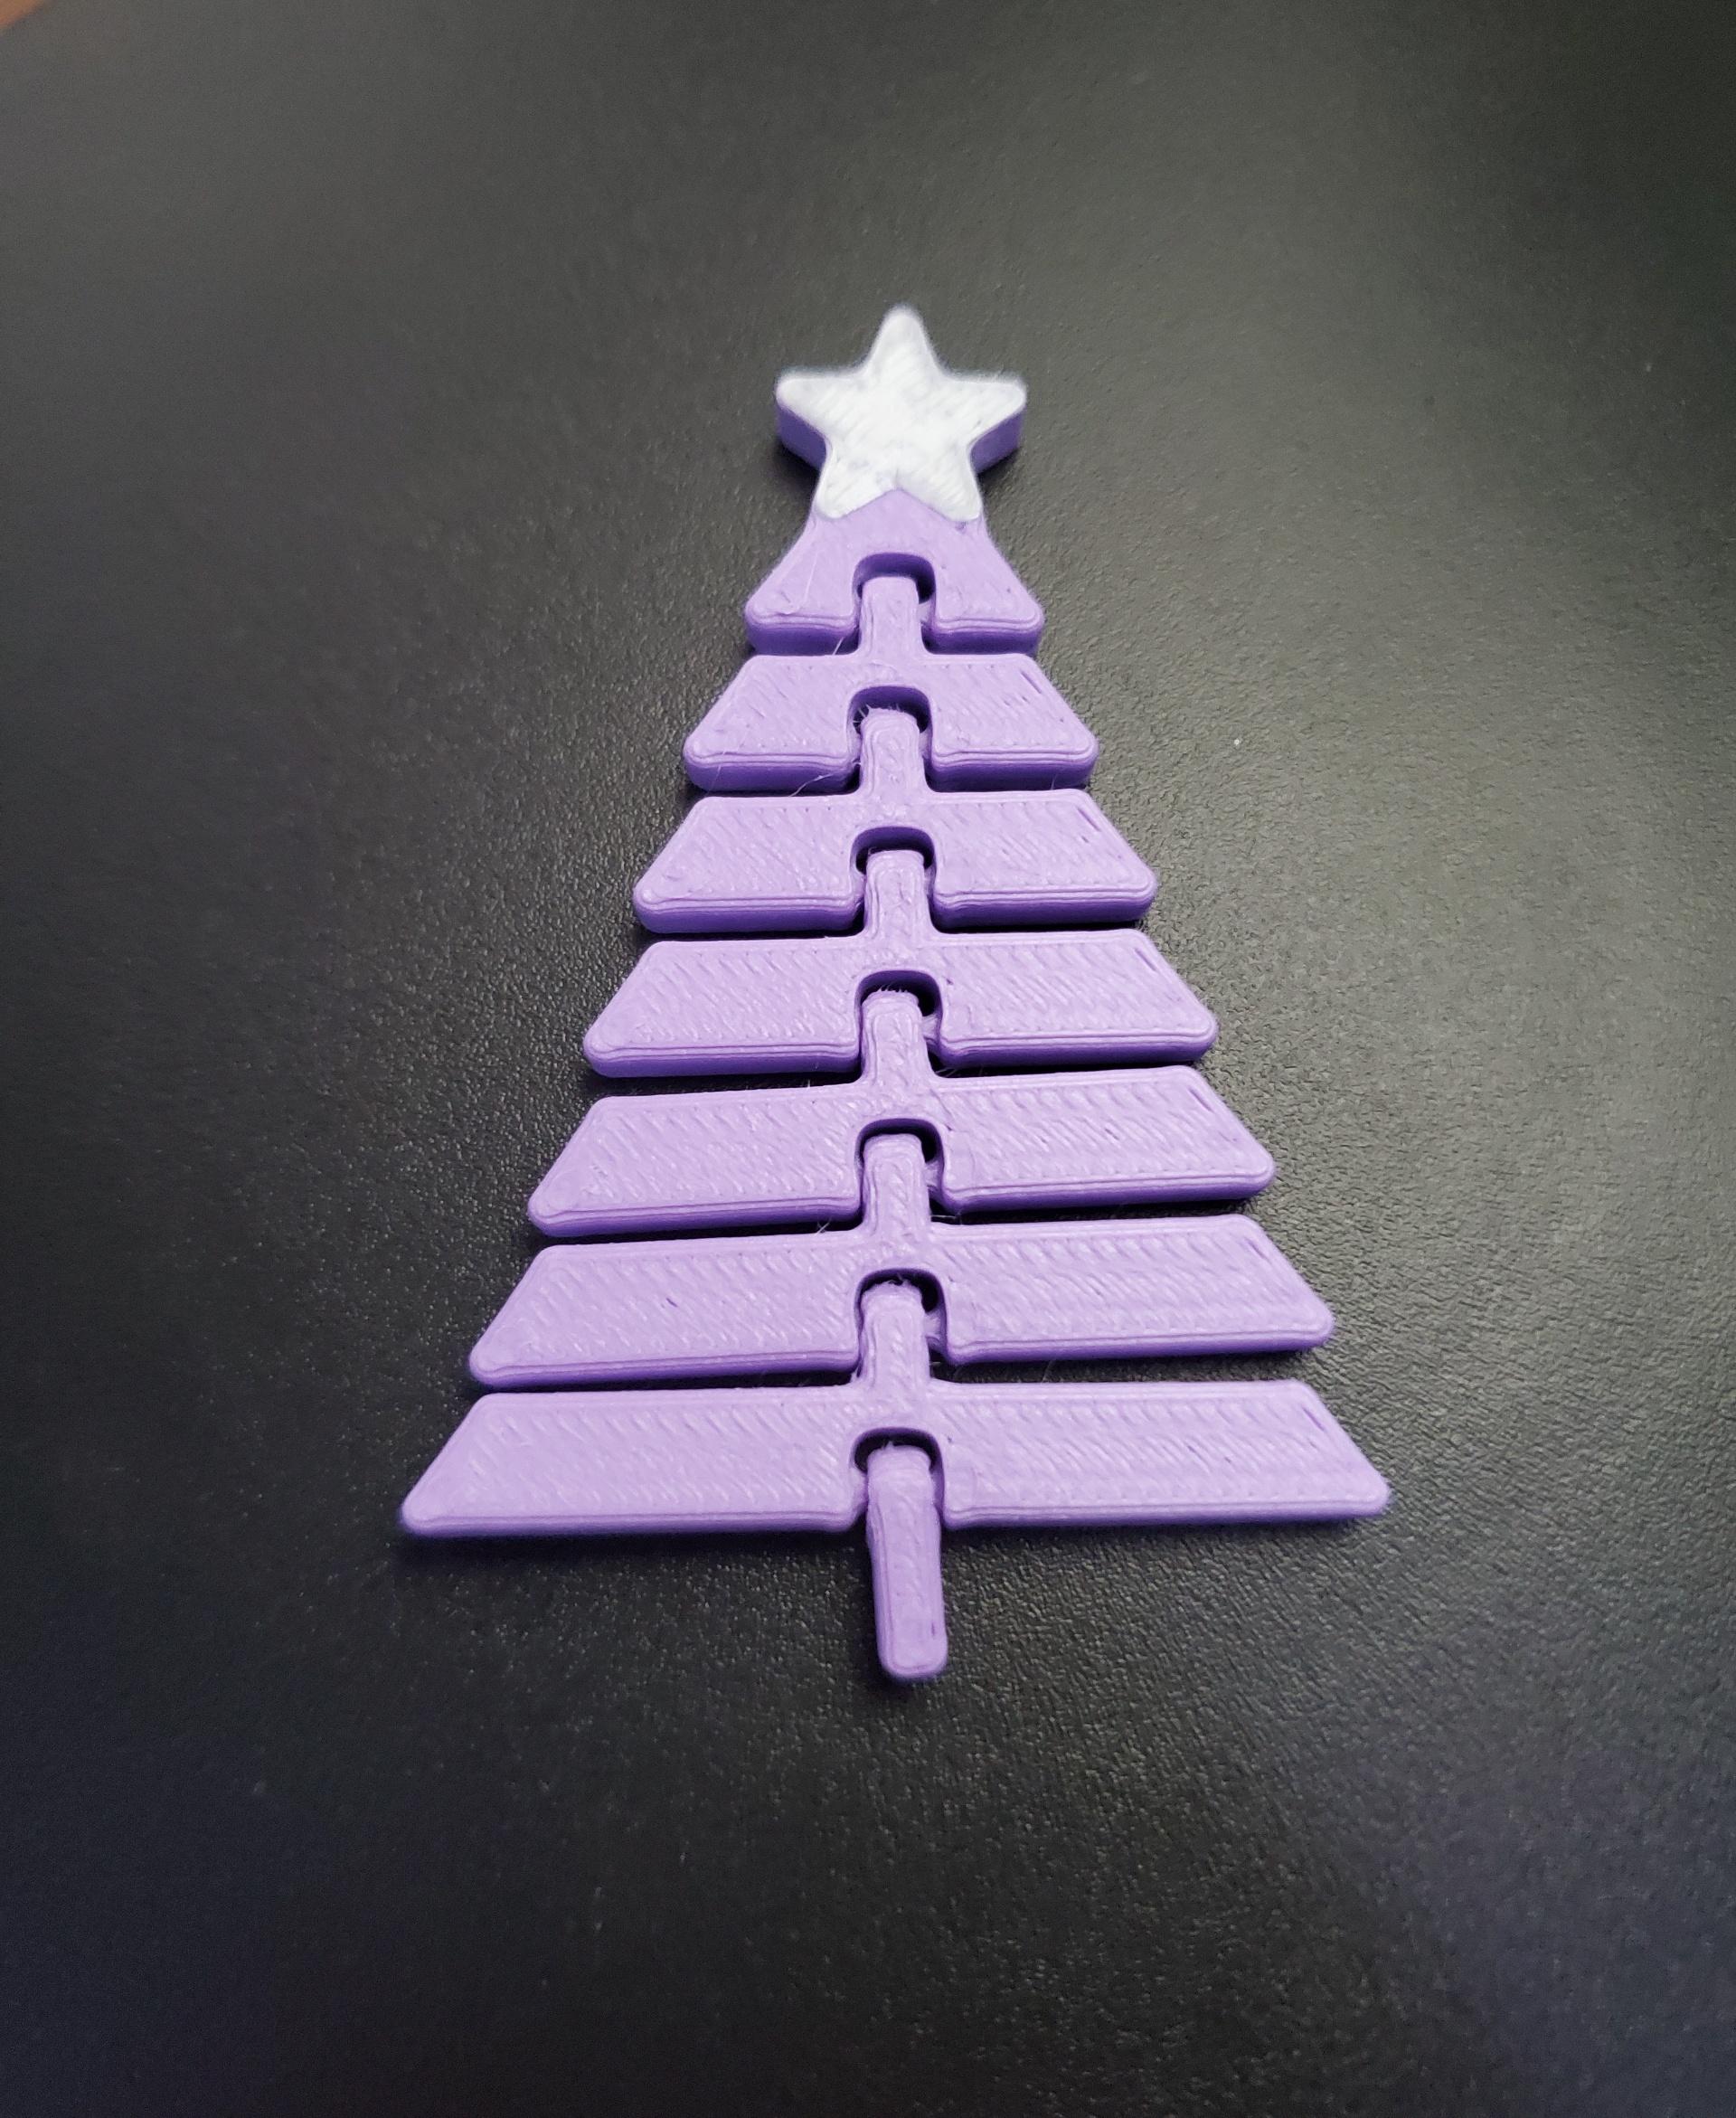 Articulated Christmas Tree with Star - Print in place fidget toy - 3mf - polyterra lavender  - 3d model